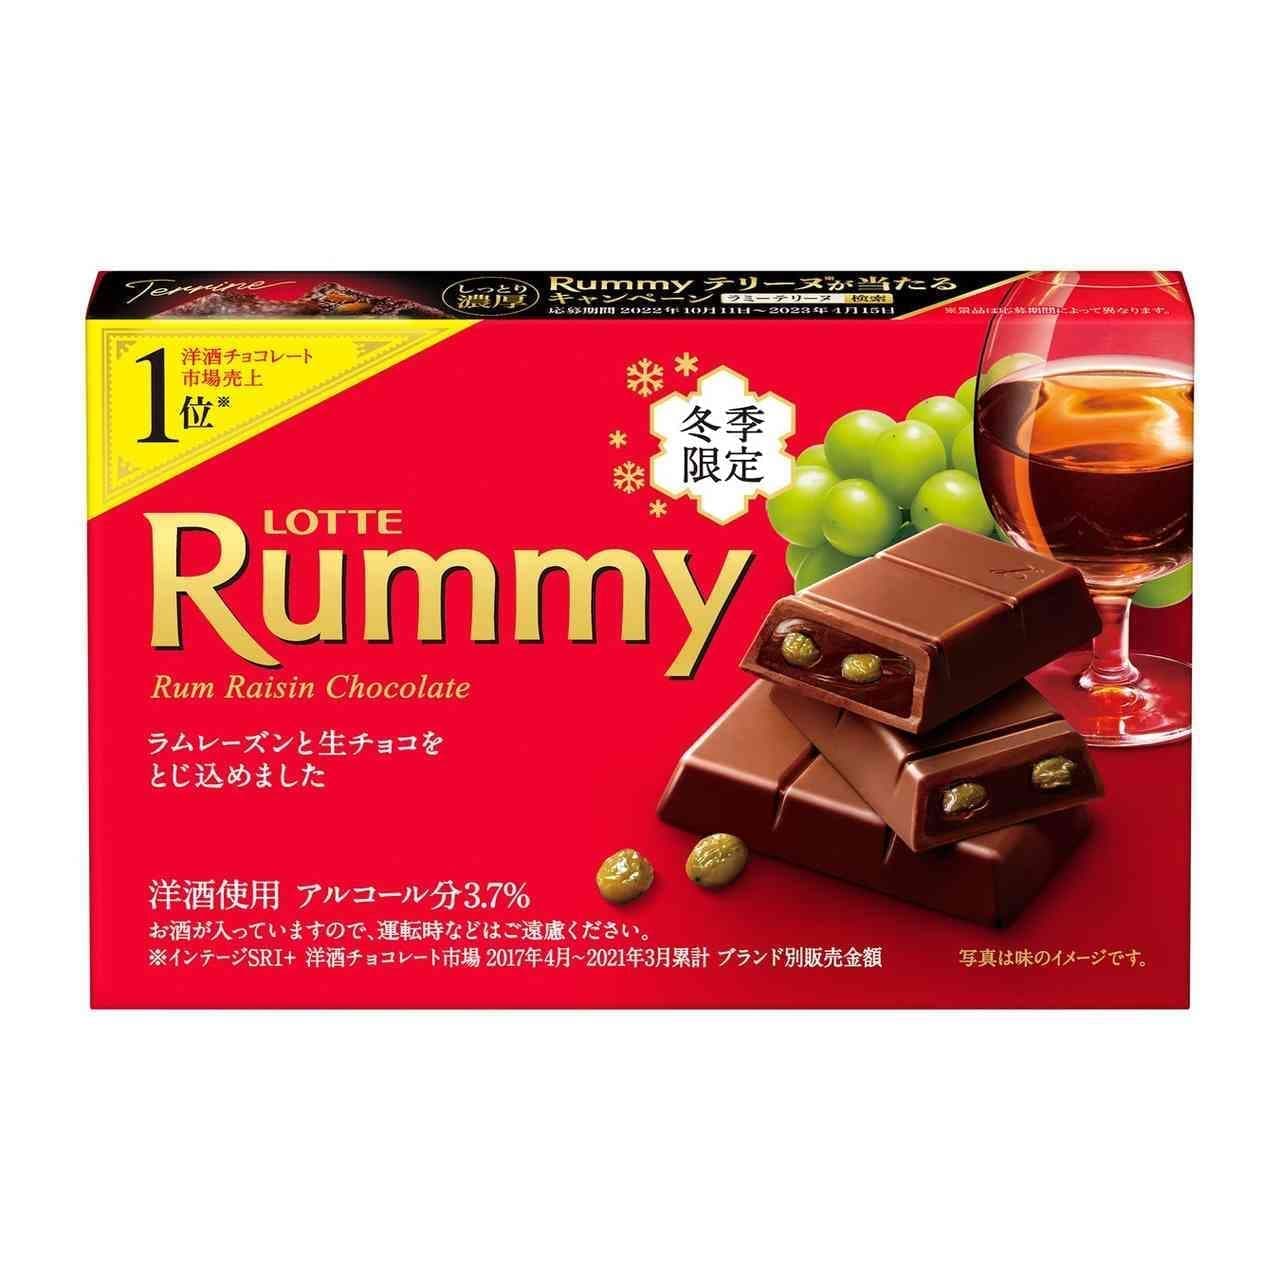 Lotte chocolate "Rummy".